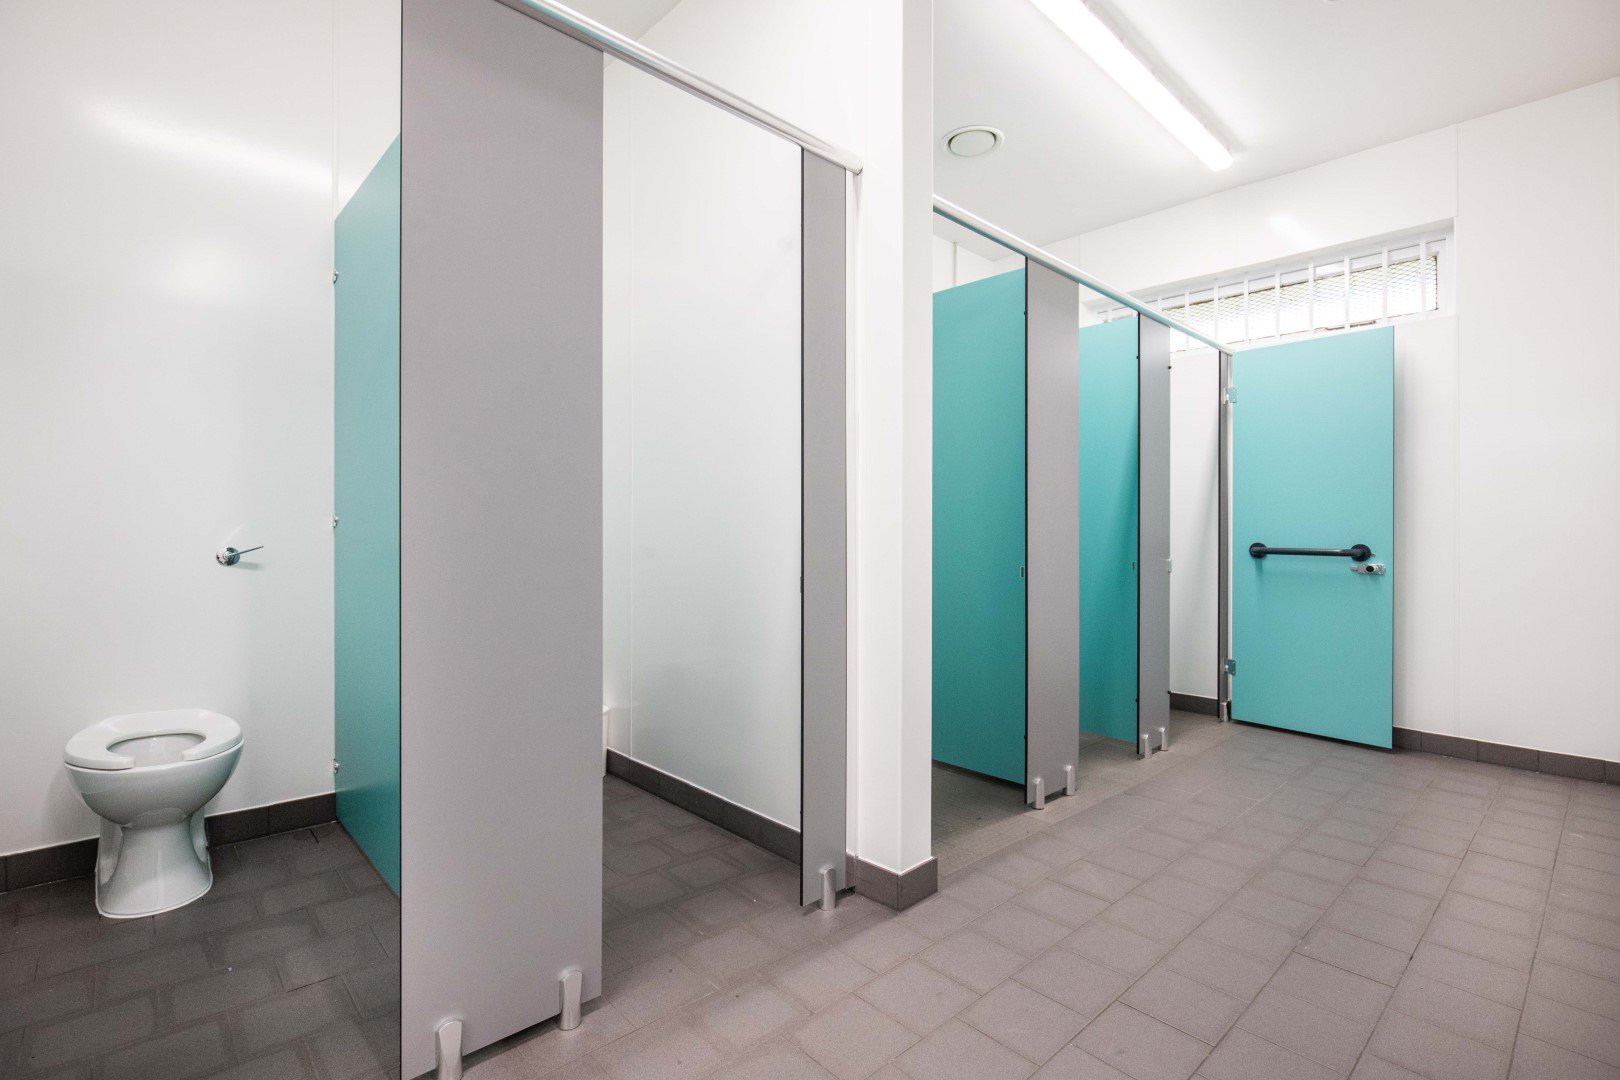 row of blue and grey toilet cubicles at riverside campsite.jpg